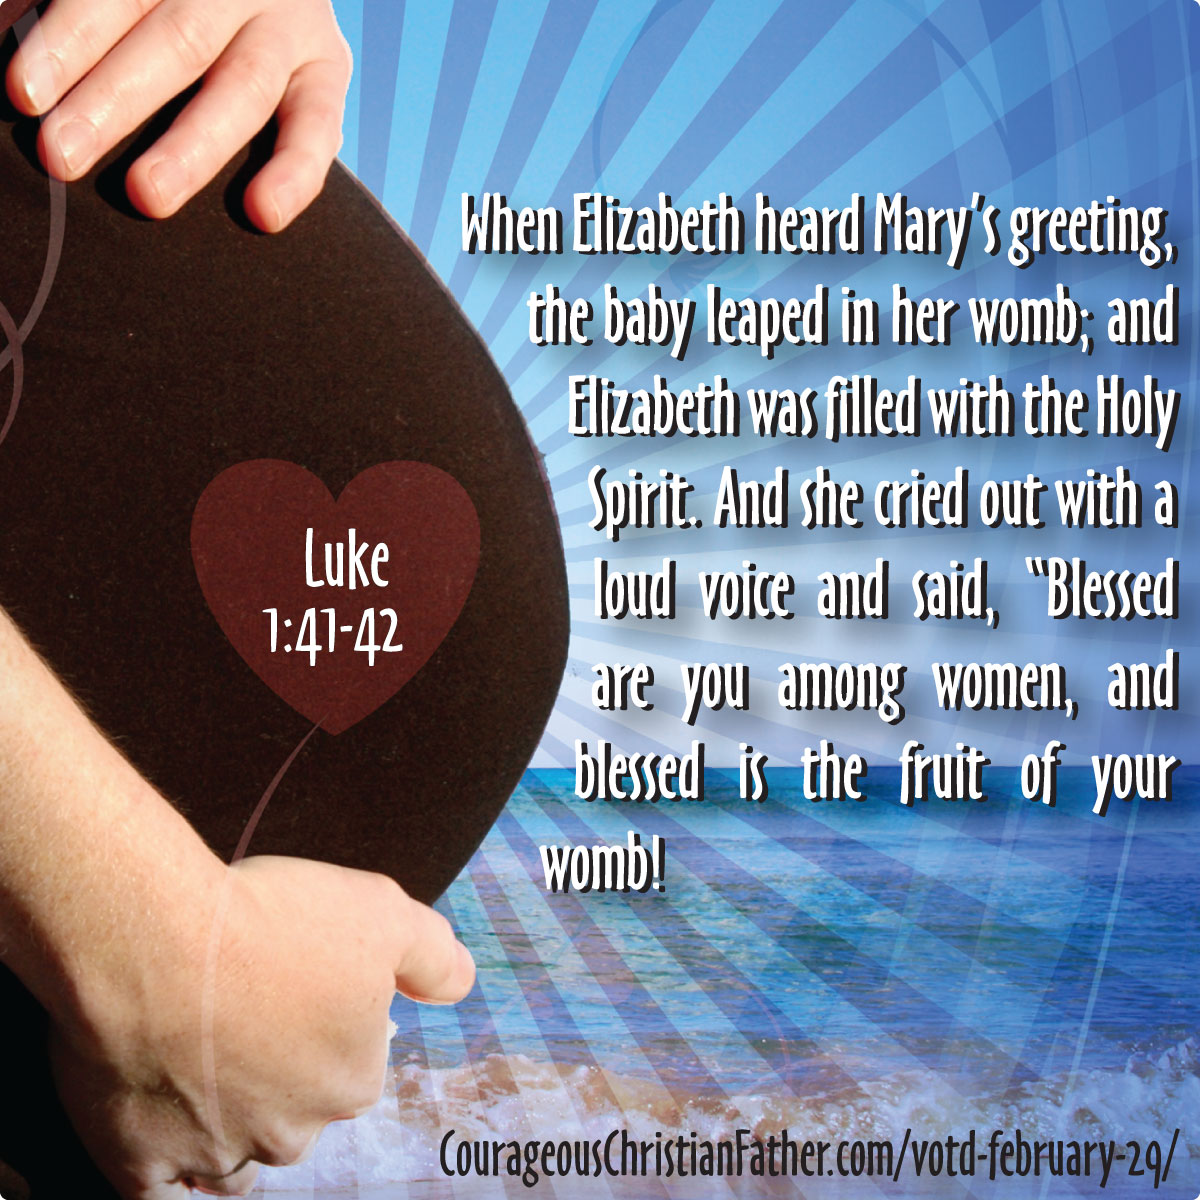 VOTD February 29 -  When Elizabeth heard Mary’s greeting, the baby leaped in her womb; and Elizabeth was filled with the Holy Spirit. And she cried out with a loud voice and said, “Blessed are you among women, and blessed is the fruit of your womb!  Luke 1:41-42